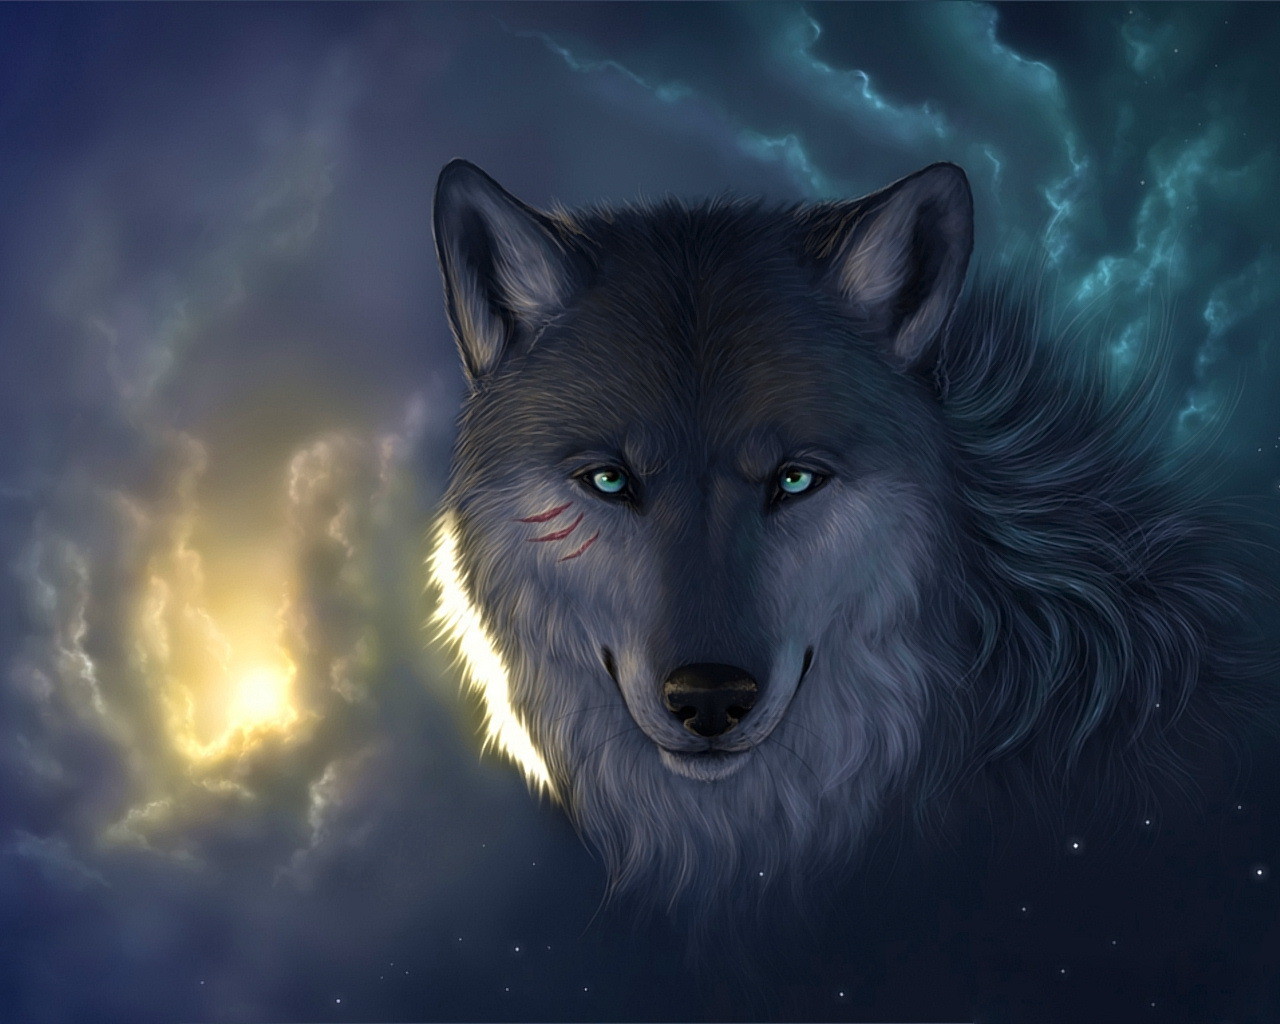 The Wolf Wallpaper Background